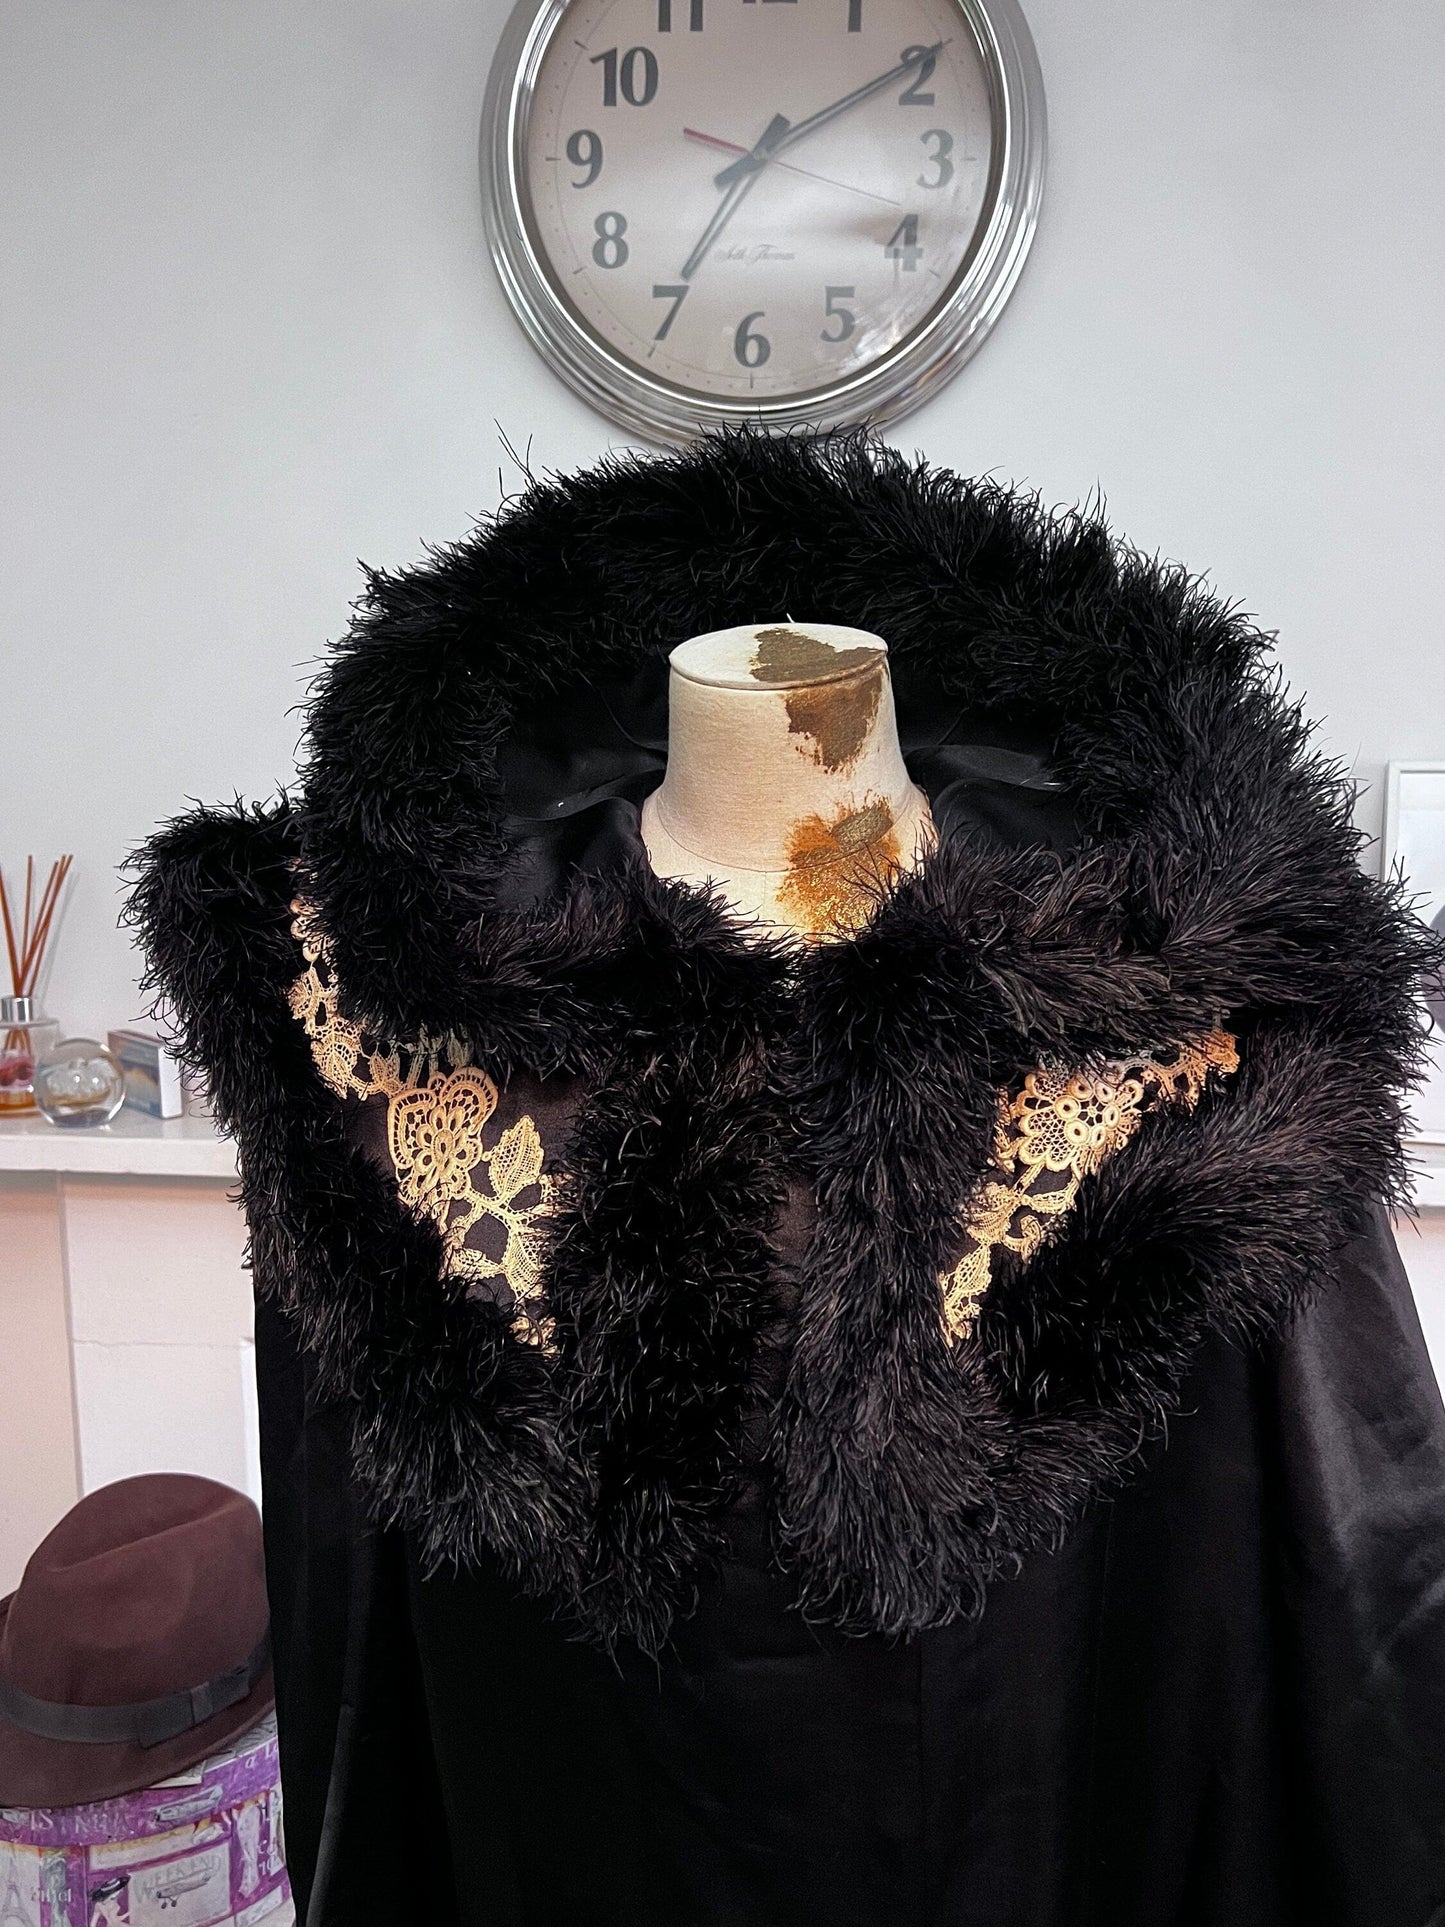 Vintage Victorian black silk opera coat Sleeved Cape, Vintage Cape, black silk lined with cream silk and silk lace details ostrich feathers